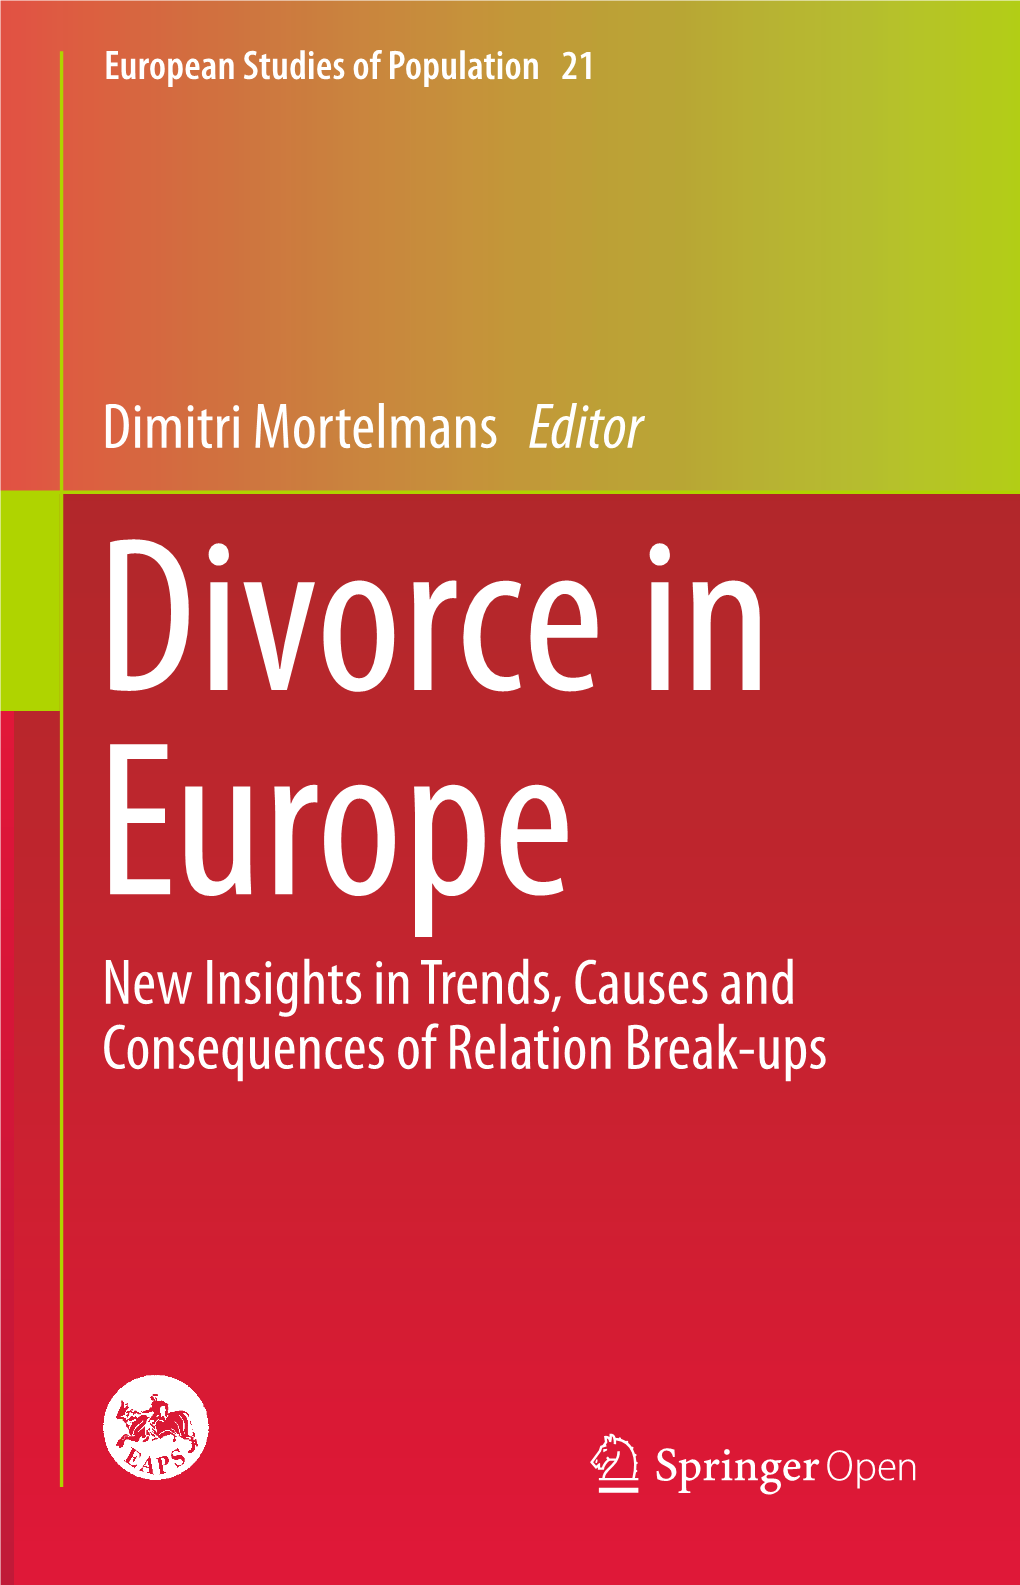 Dimitri Mortelmans Editor New Insights in Trends, Causes And